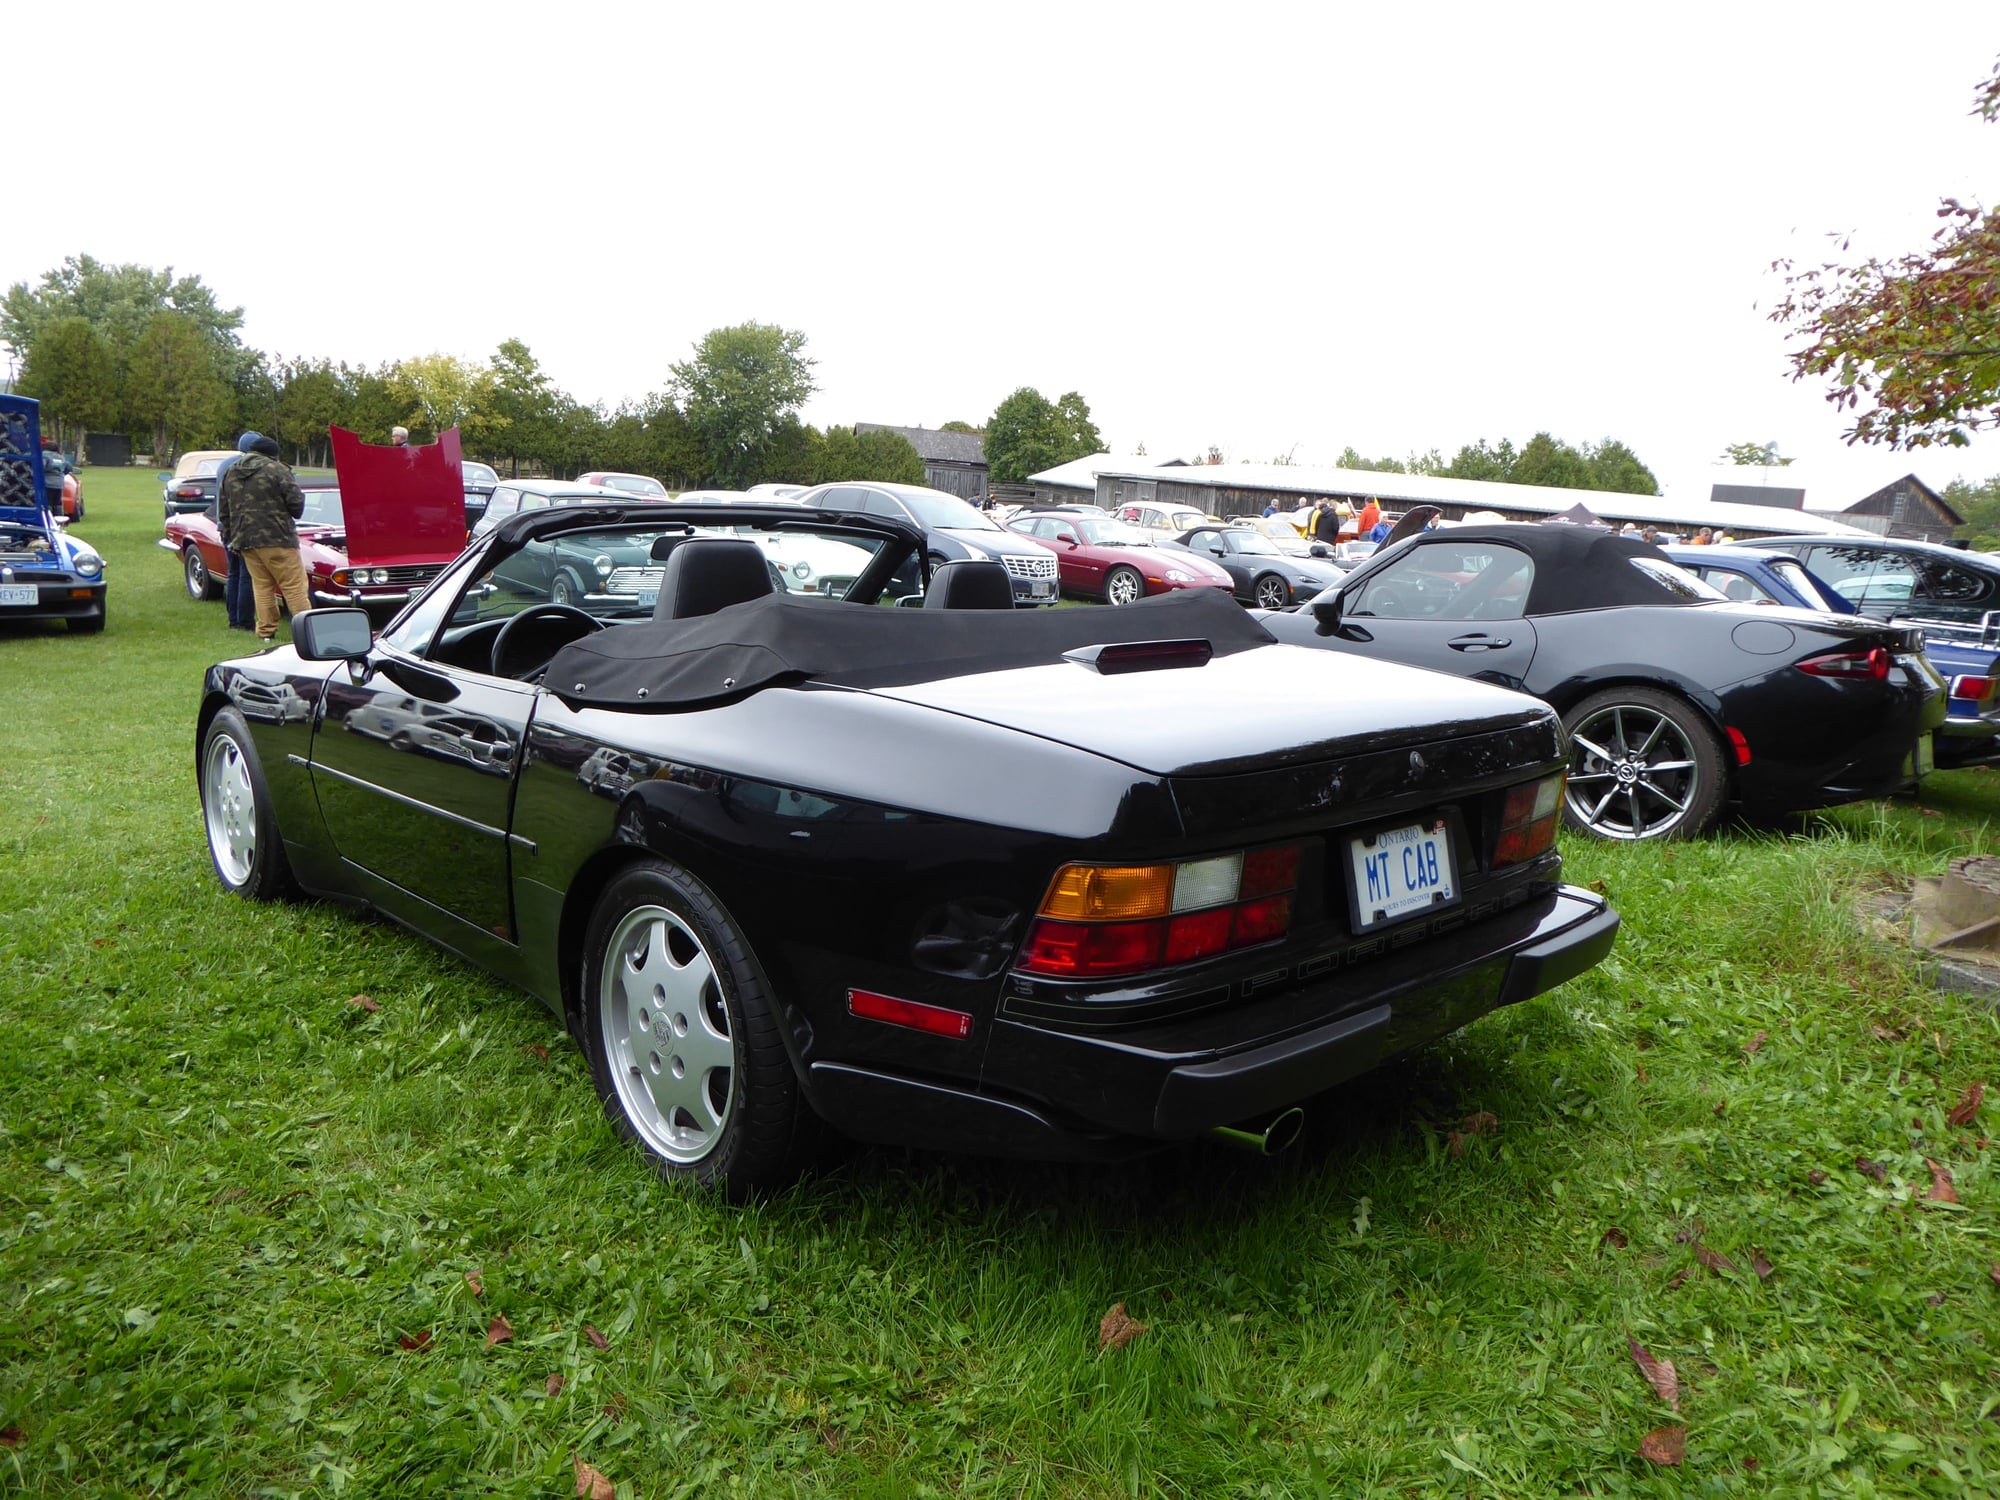 1989 Porsche 944 - Very clean pampered original 2 owner 944 S2 Cab in Ontario - Used - VIN WP0BA0941KN480146 - 171,000 Miles - 4 cyl - 2WD - Manual - Convertible - Black - Barrie, ON L0L2N0, Canada